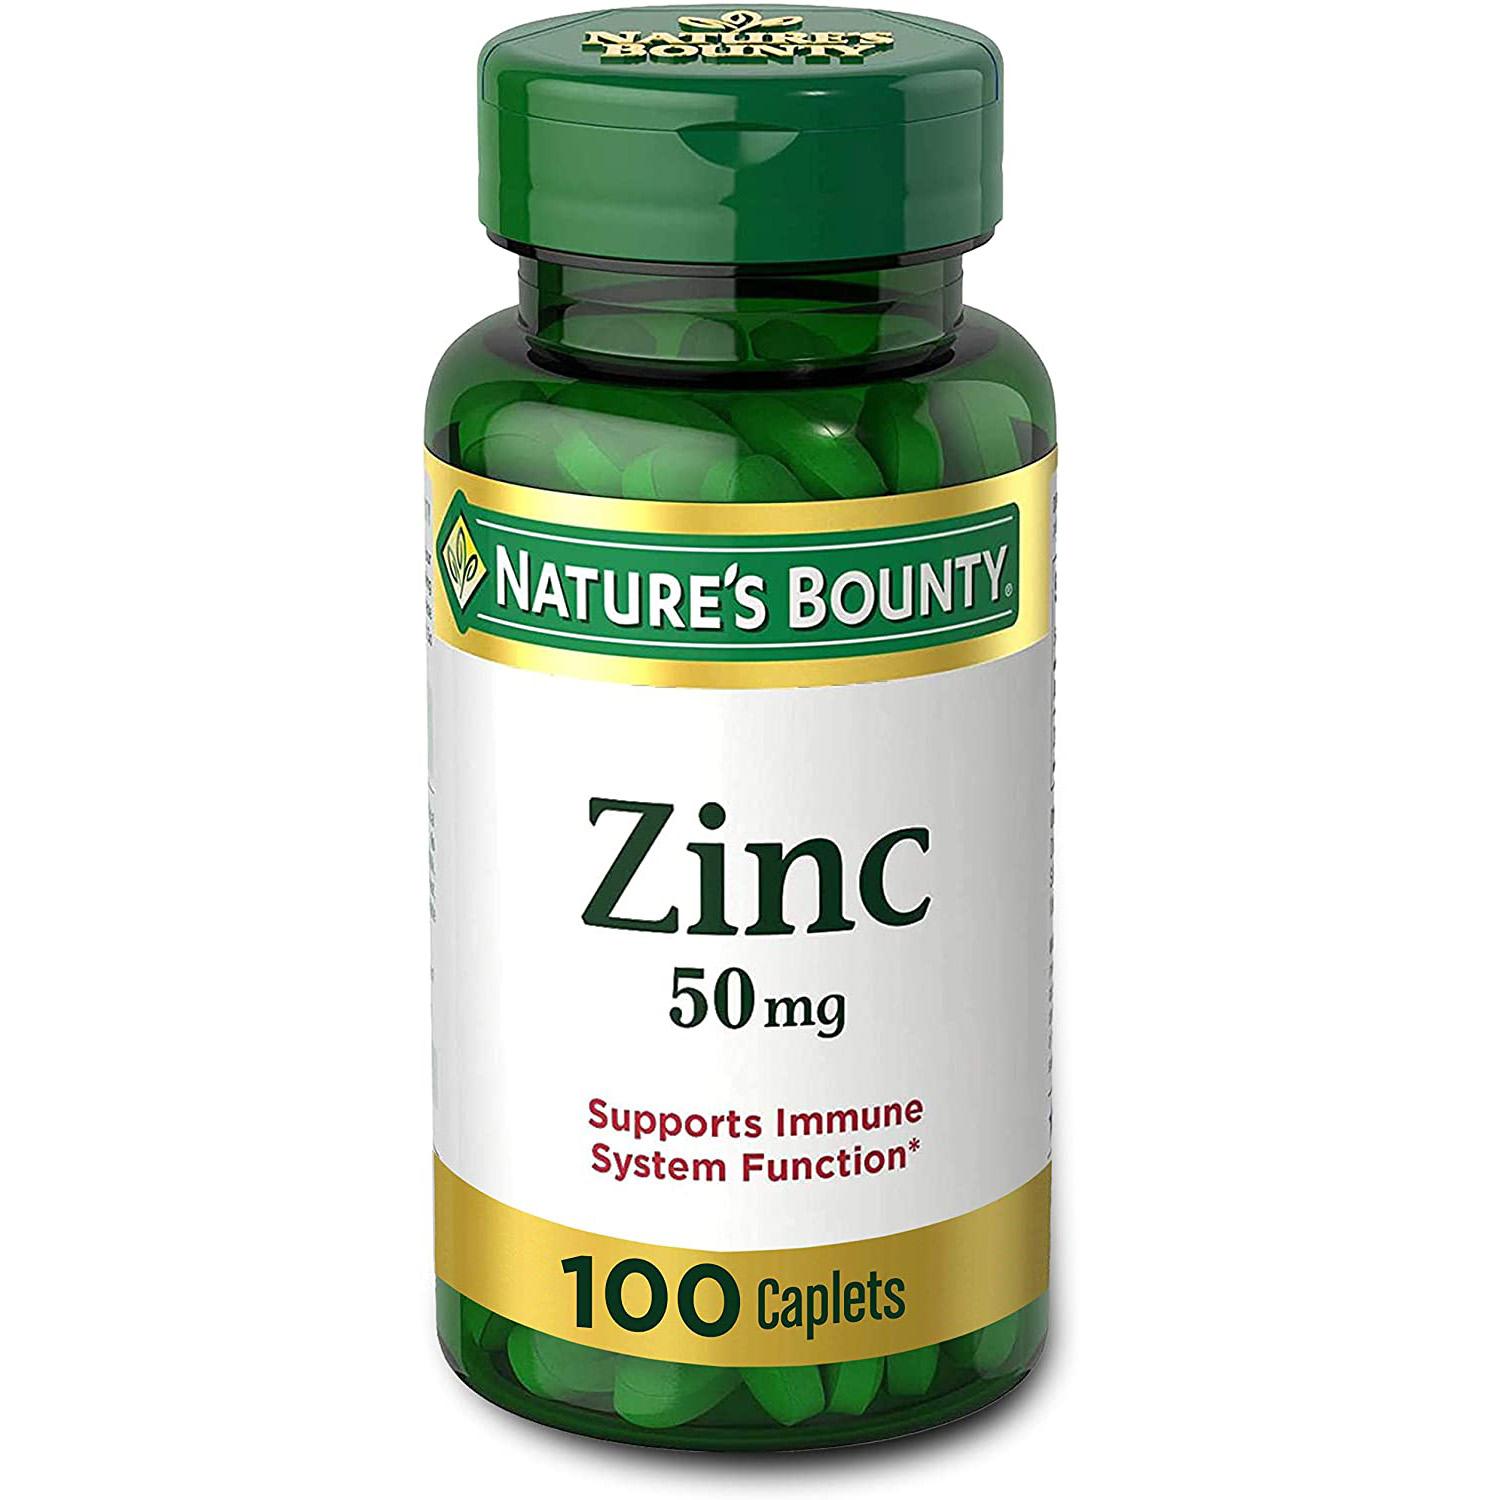 100 Natures Bounty 50mg Zinc Caplets for $3.29 Shipped